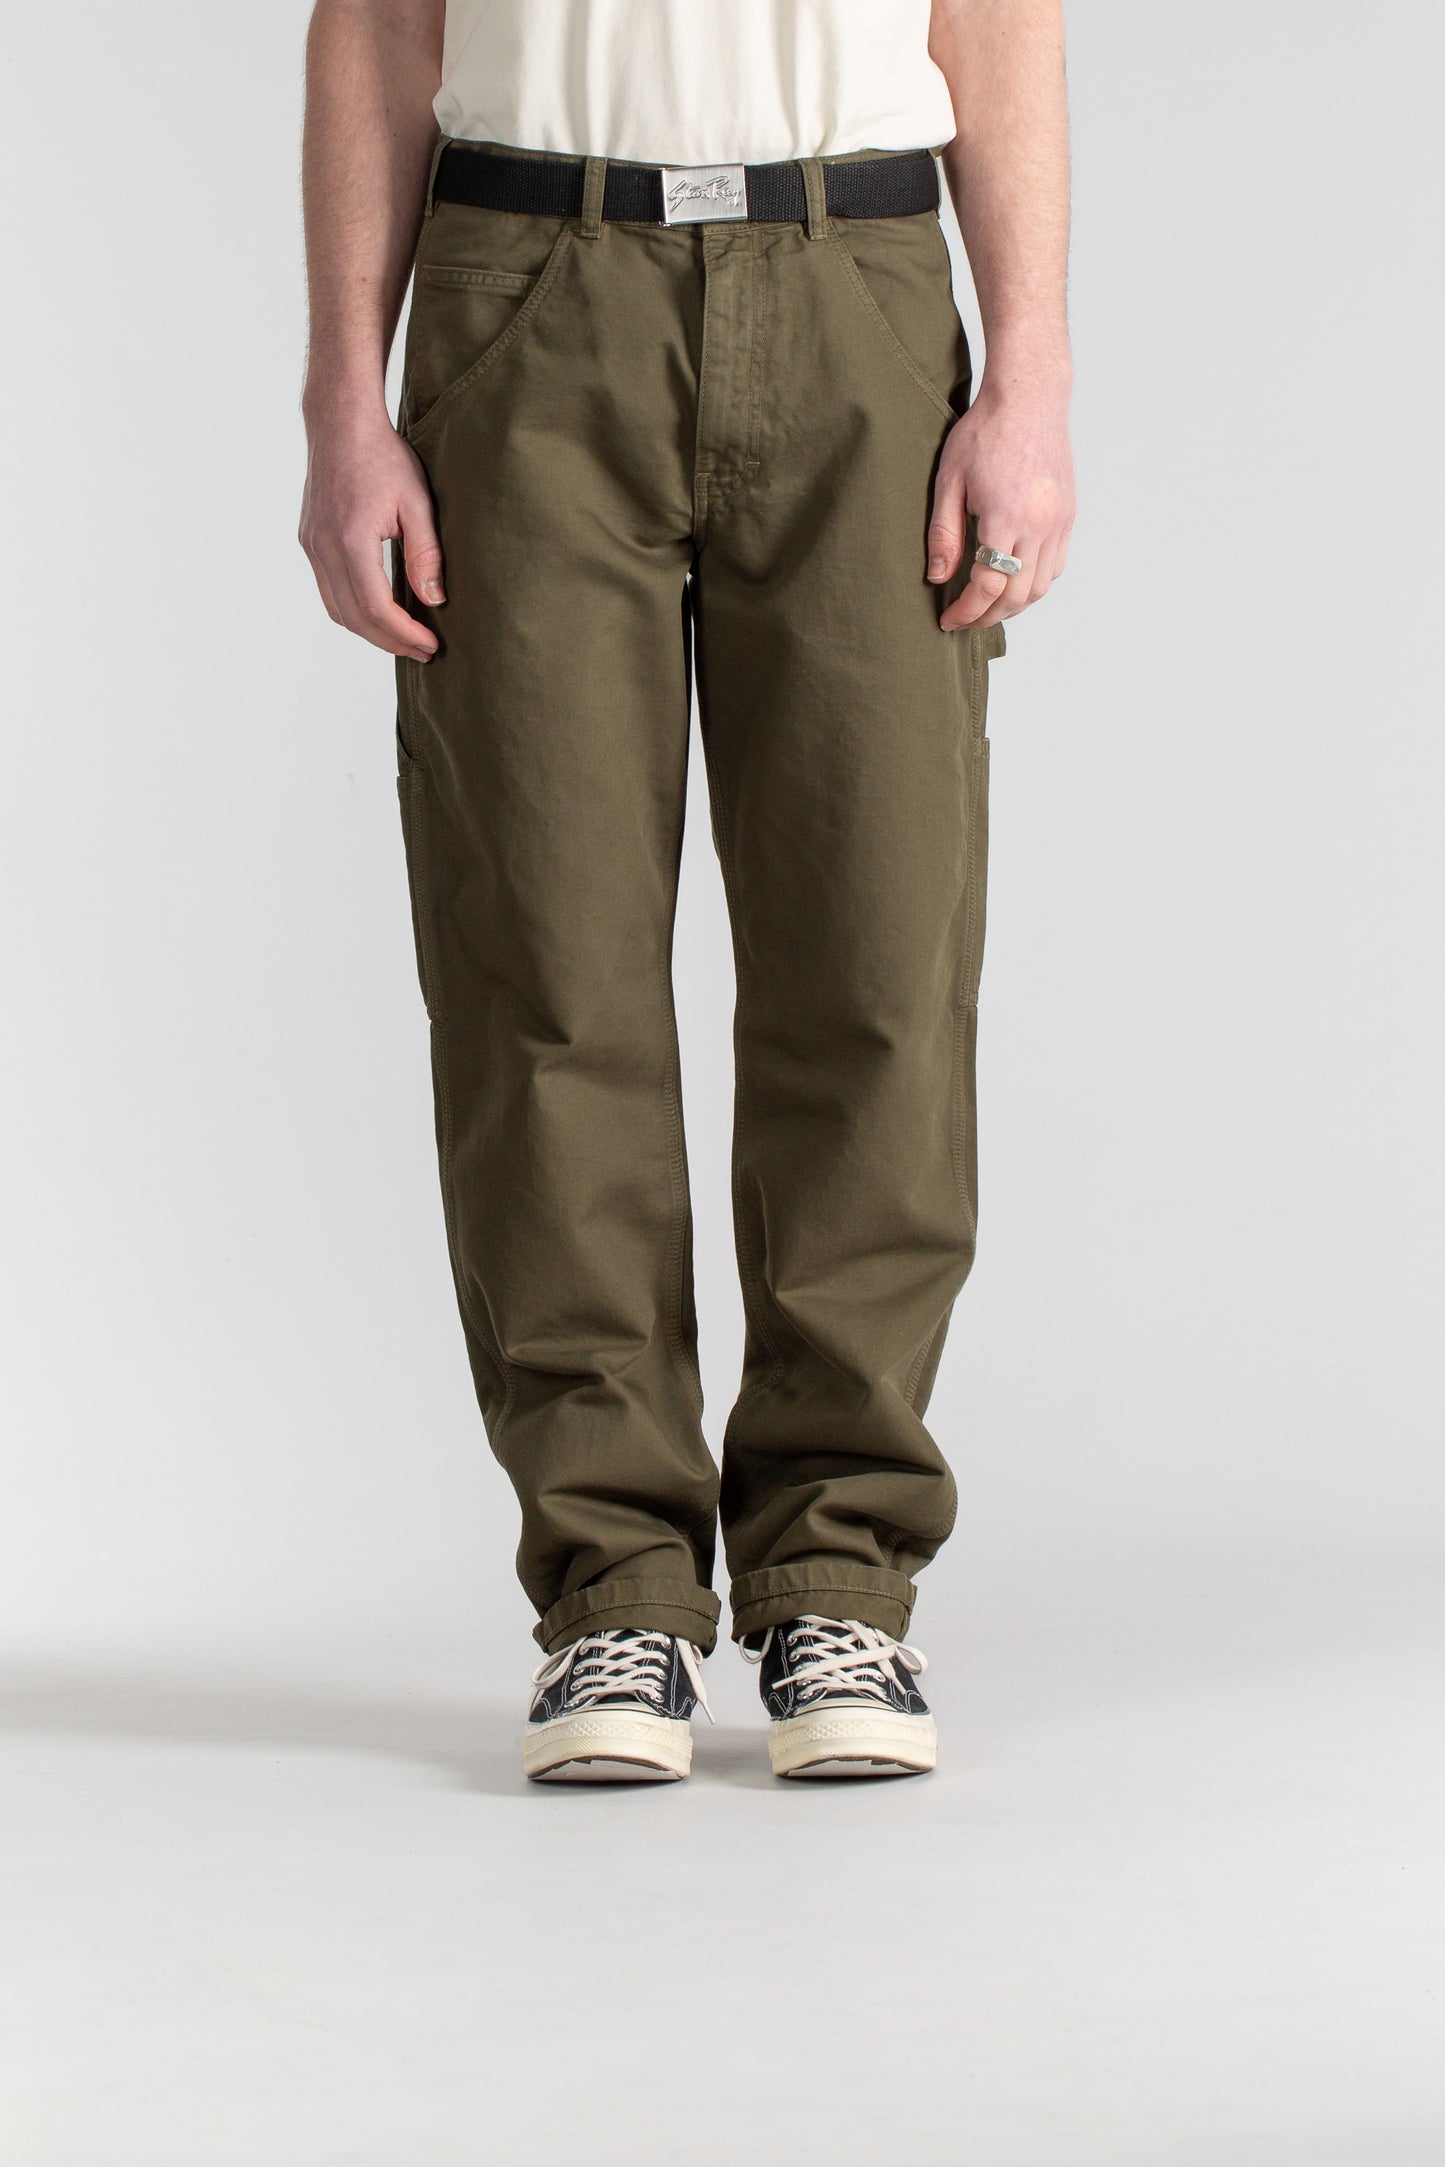 80s Painter Pant (Olive Twill)